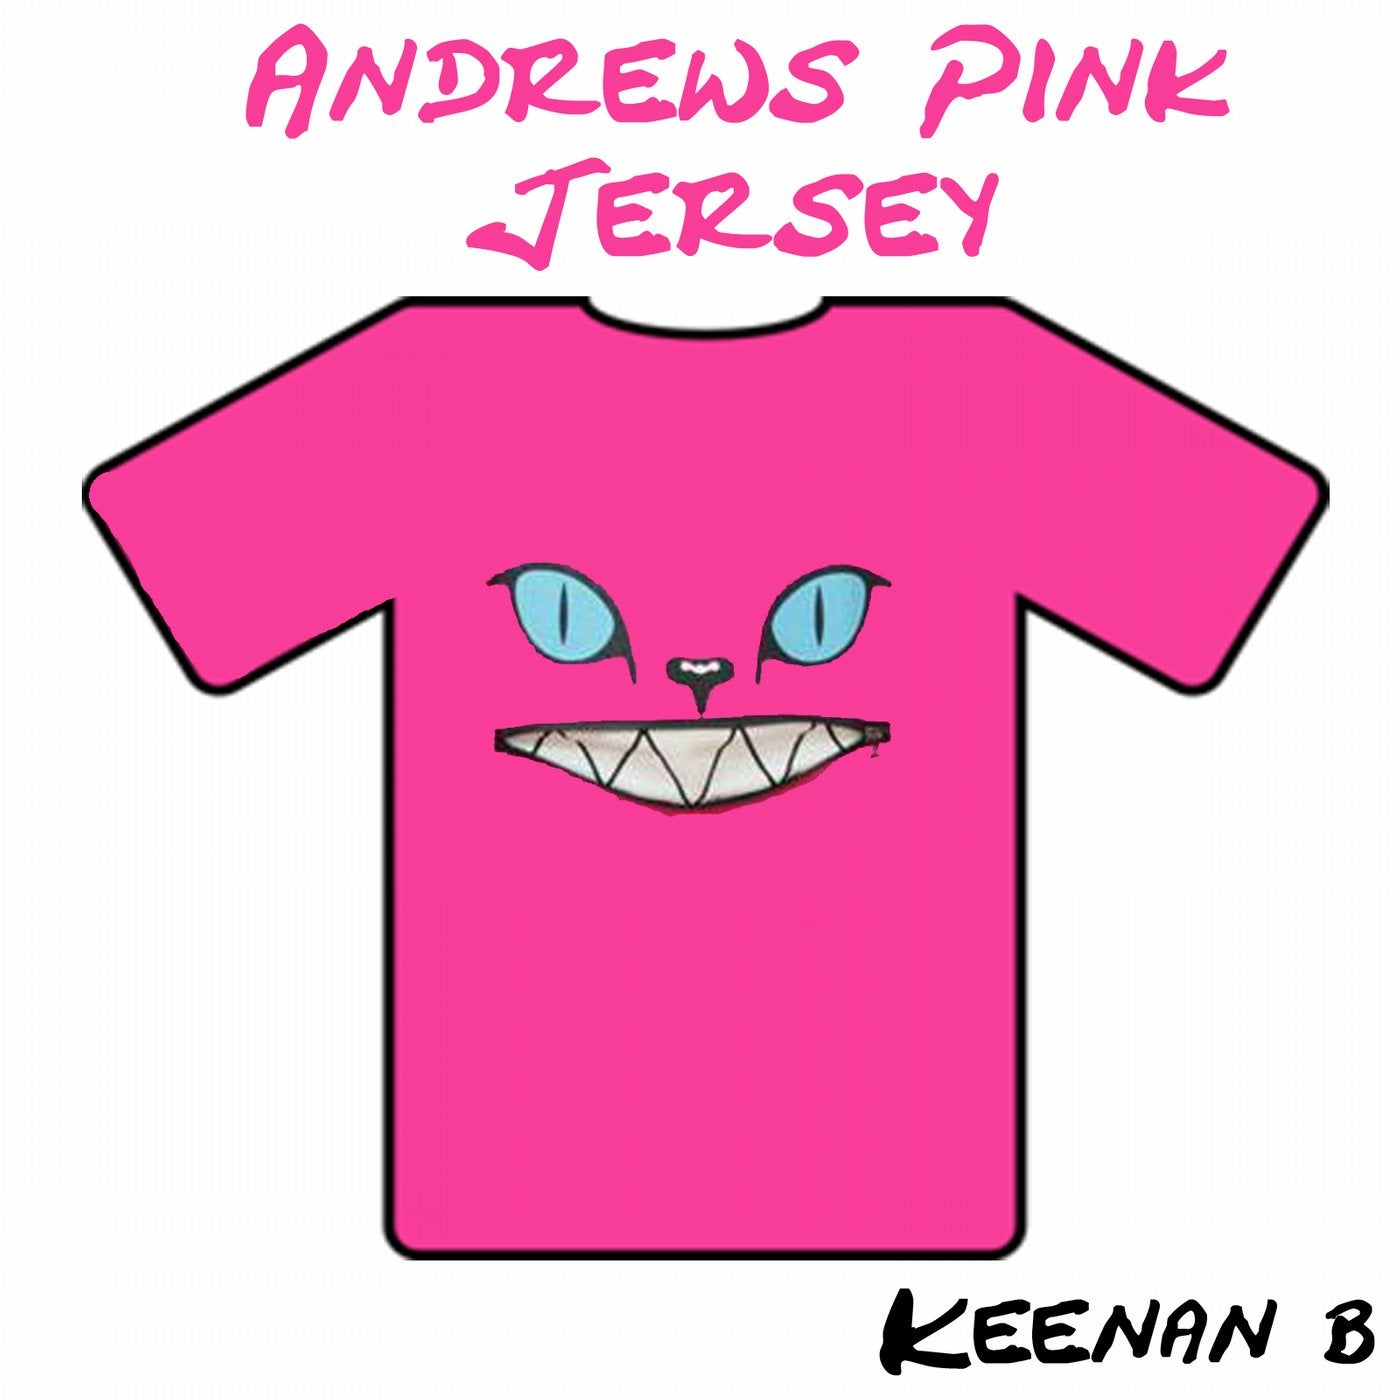 Andrew's Pink Jersey